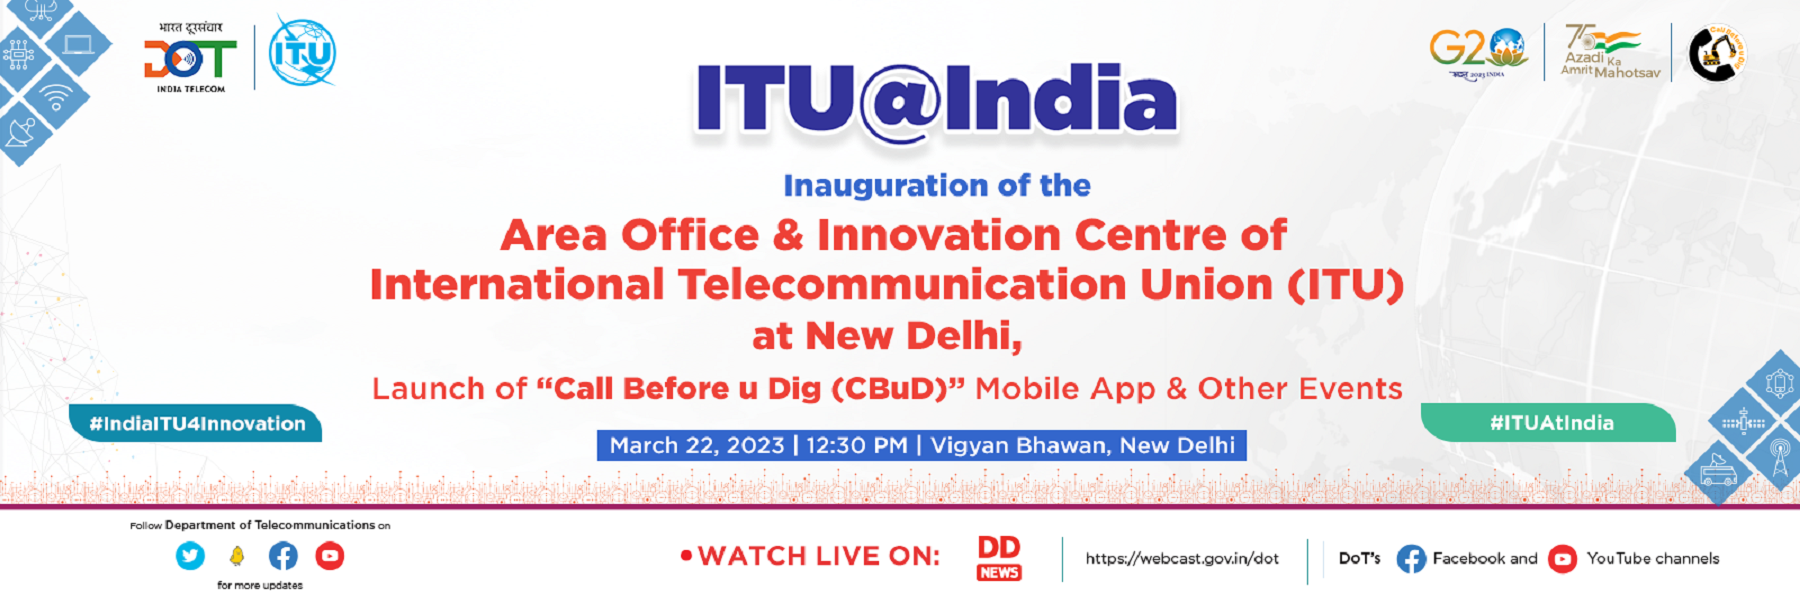 Inauguration of the Area Office and Innovation Centre of ITU at New Delhi